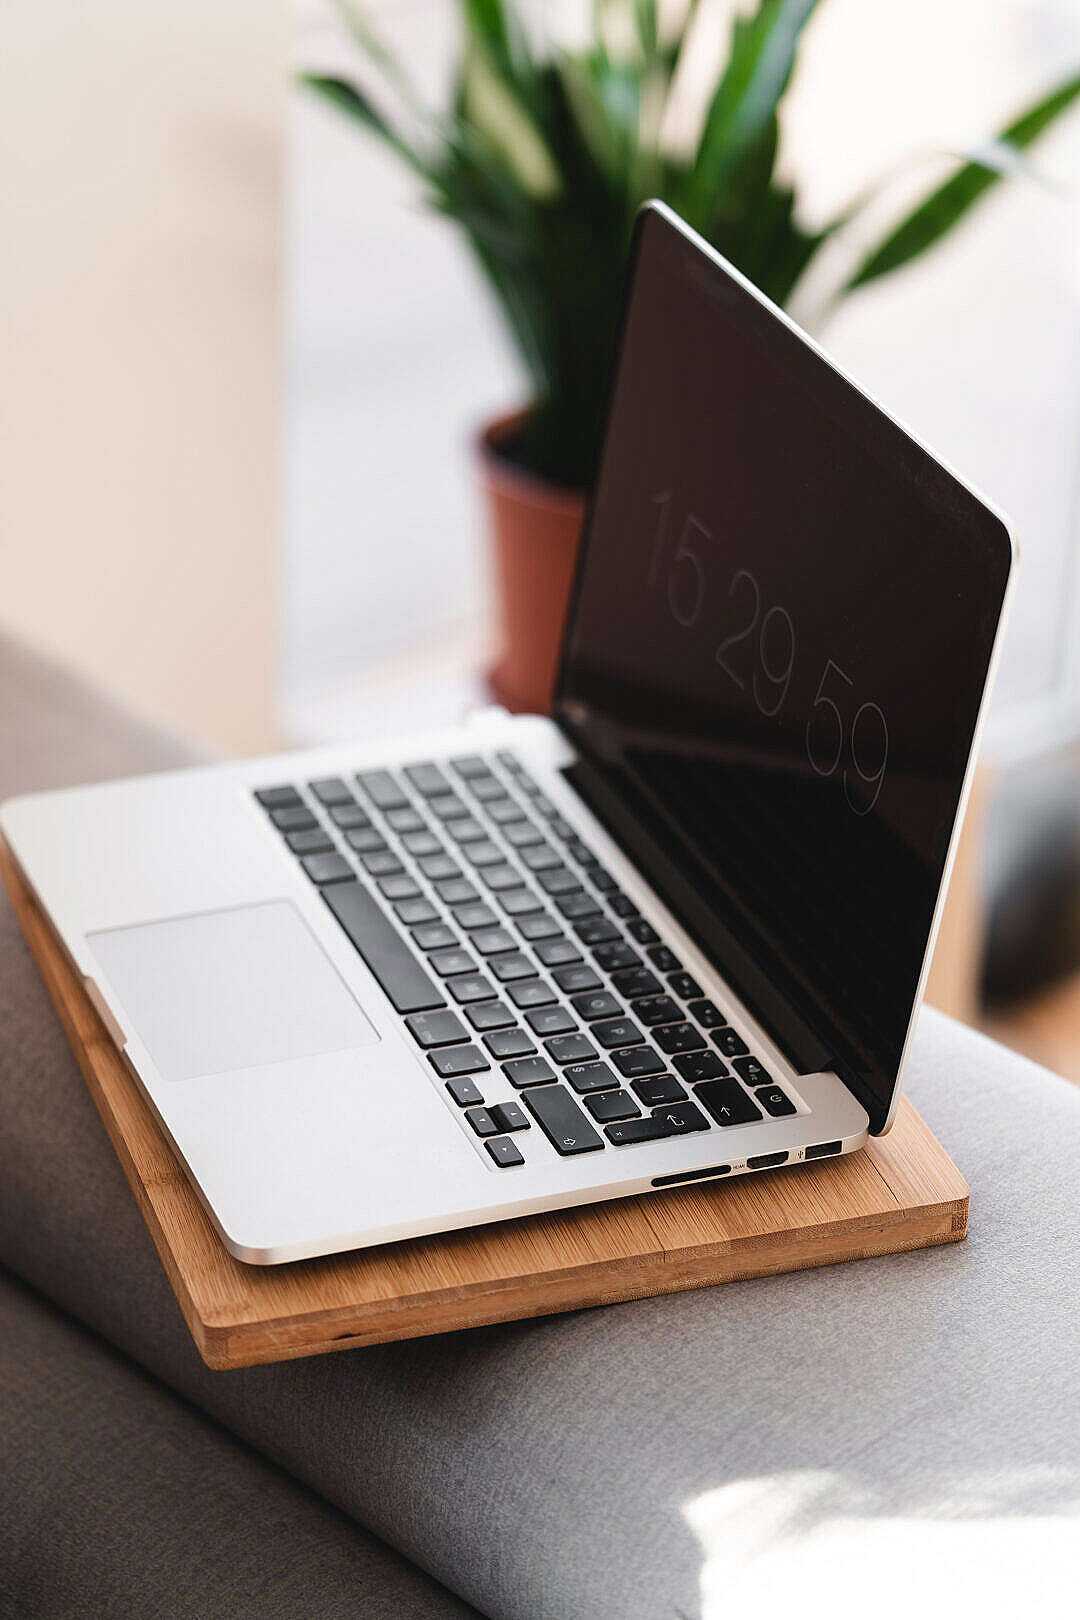 Download Modern MacBook Laptop on a Sofa at Home FREE Stock Photo